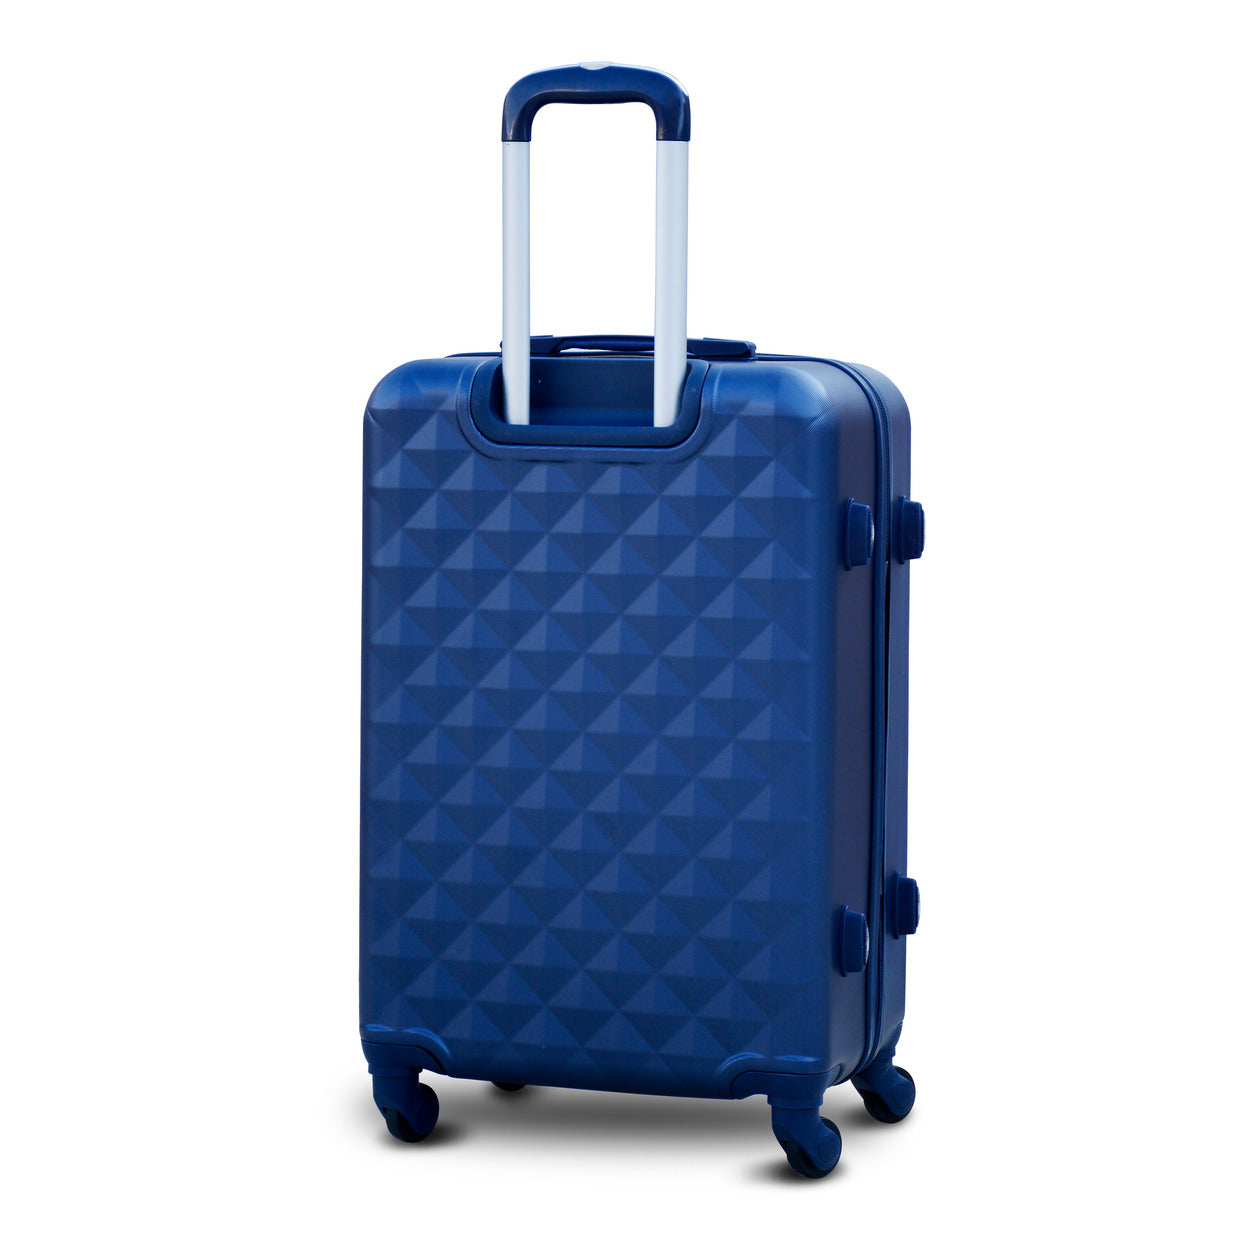 4 Piece Full Set 7" 20" 24" 28 Inches Blue Colour Diamond Cut ABS Luggage Lightweight Hard Case Trolley Bag